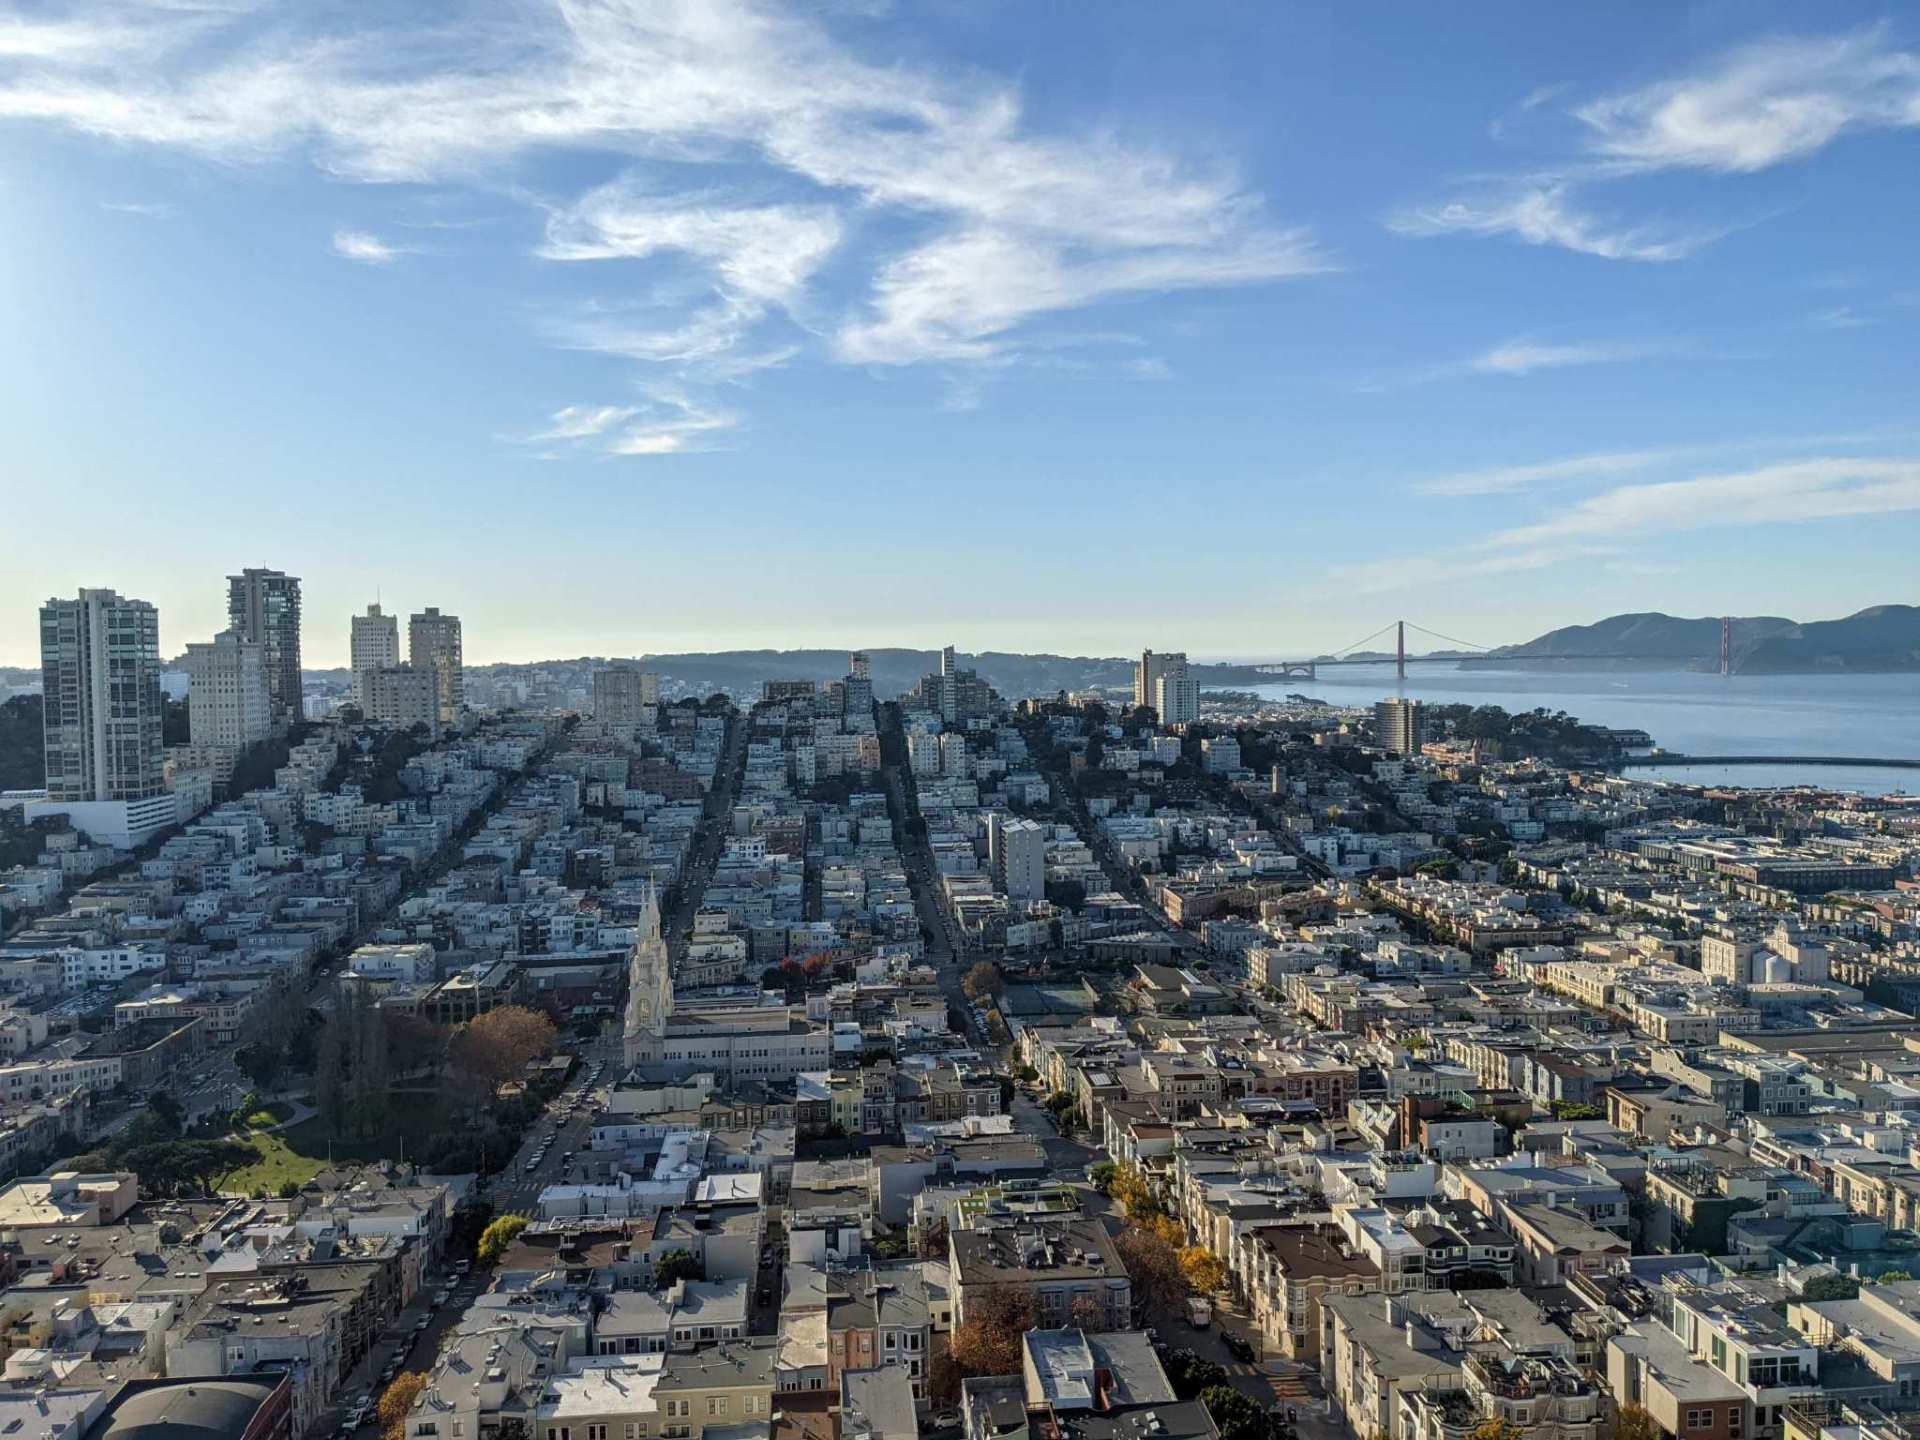 The view of San Francisco from the top of Coit Tower.